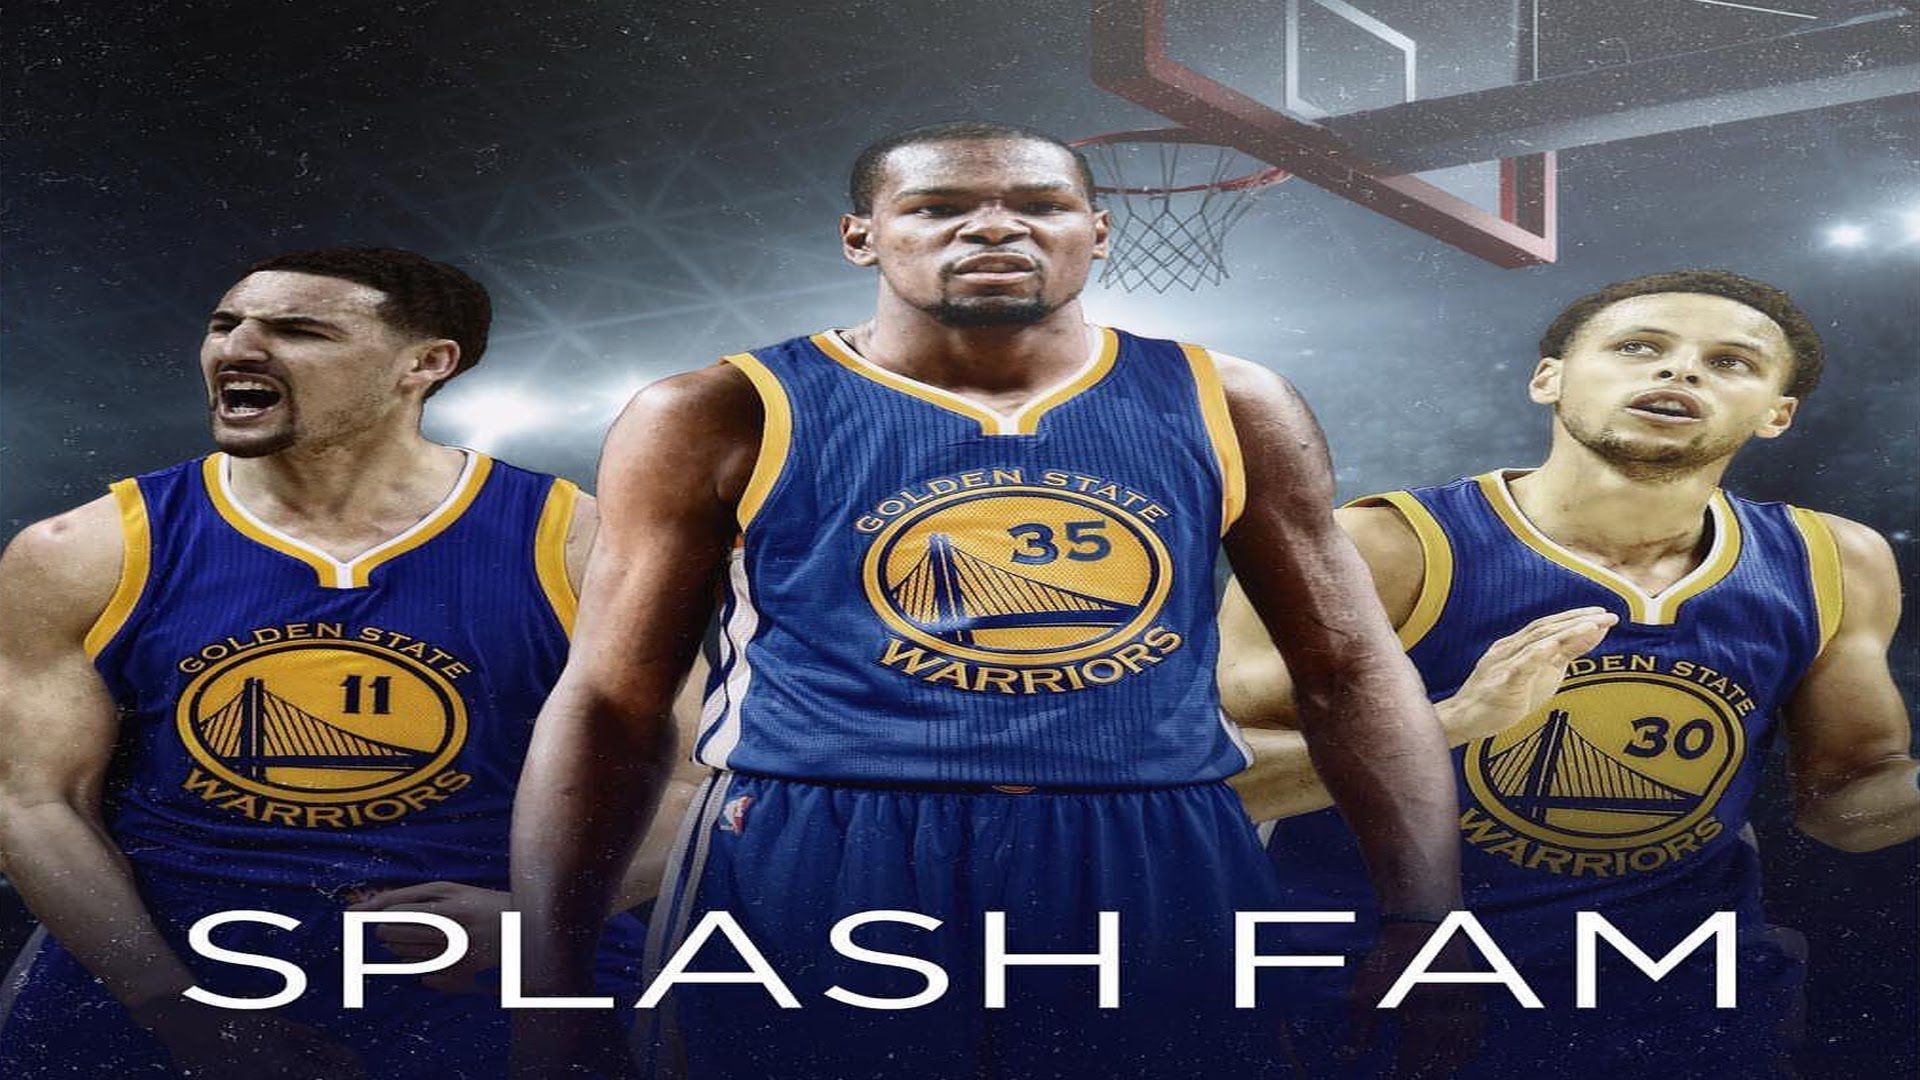 kd and curry wallpaper,basketball player,player,team sport,team,jersey